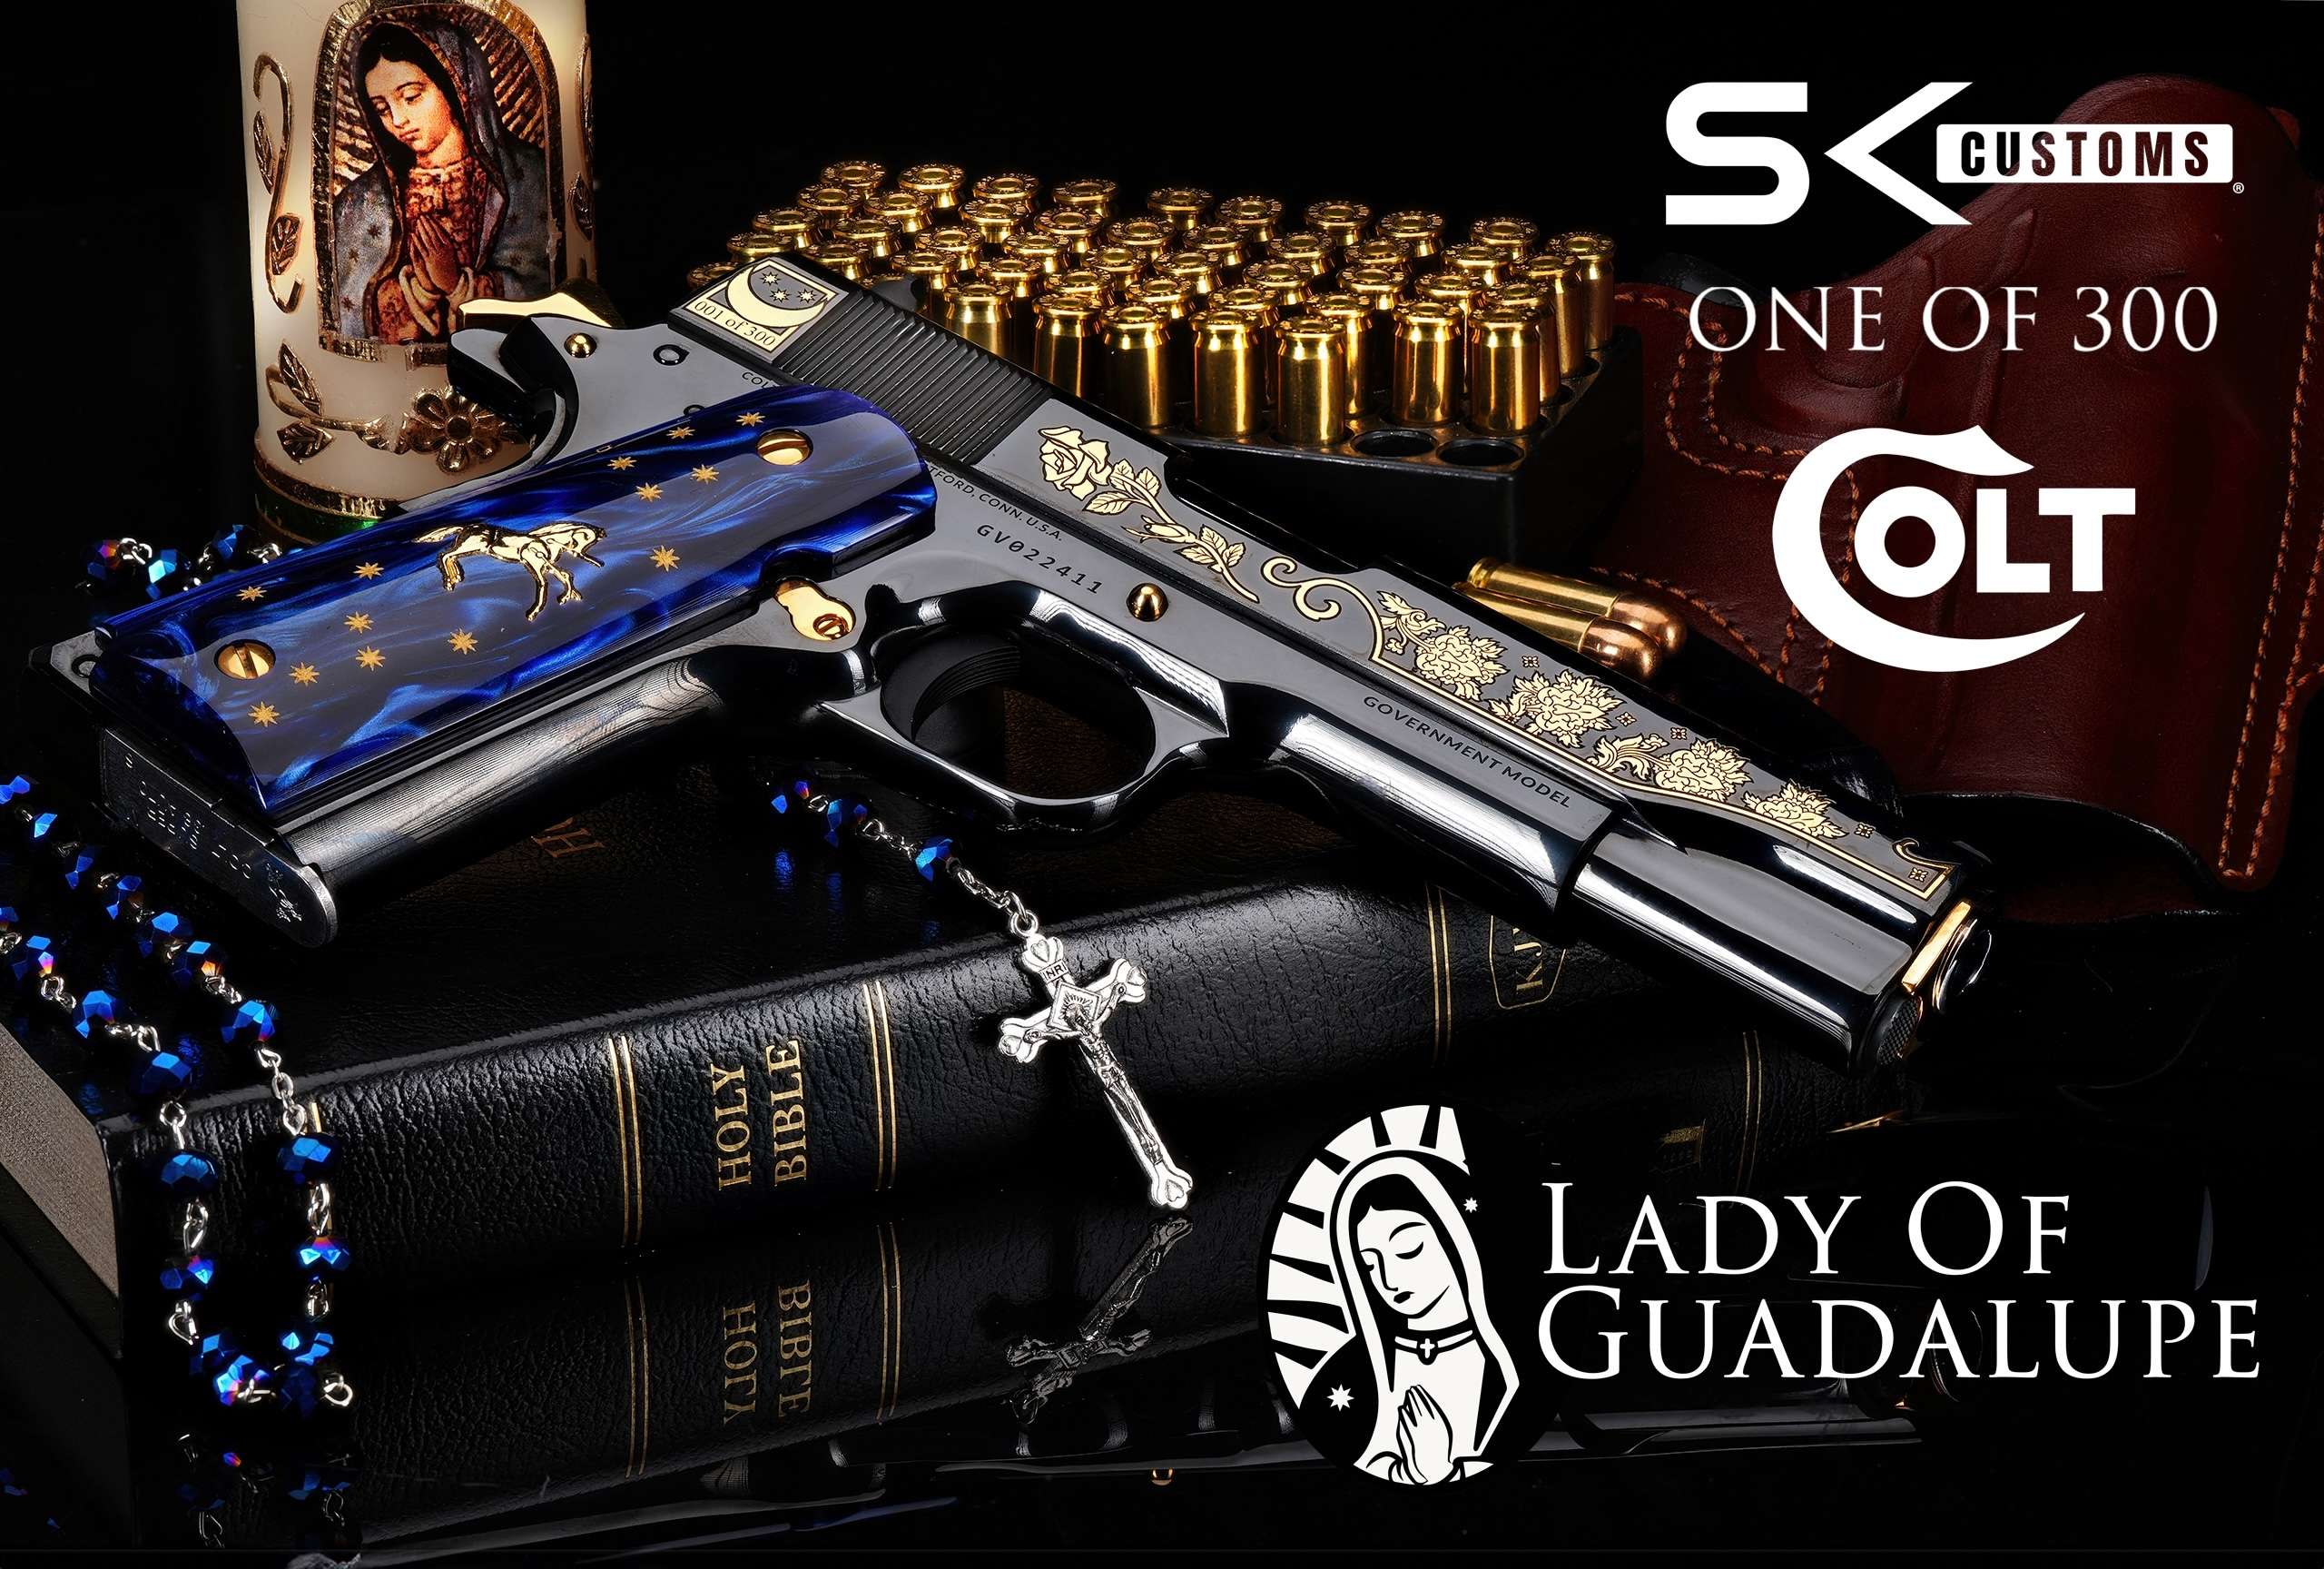 SK CUSTOMS COLT 1911 38 Super LADY OF GUADALUPE LIMITED EDITION #004 OF 300-img-0